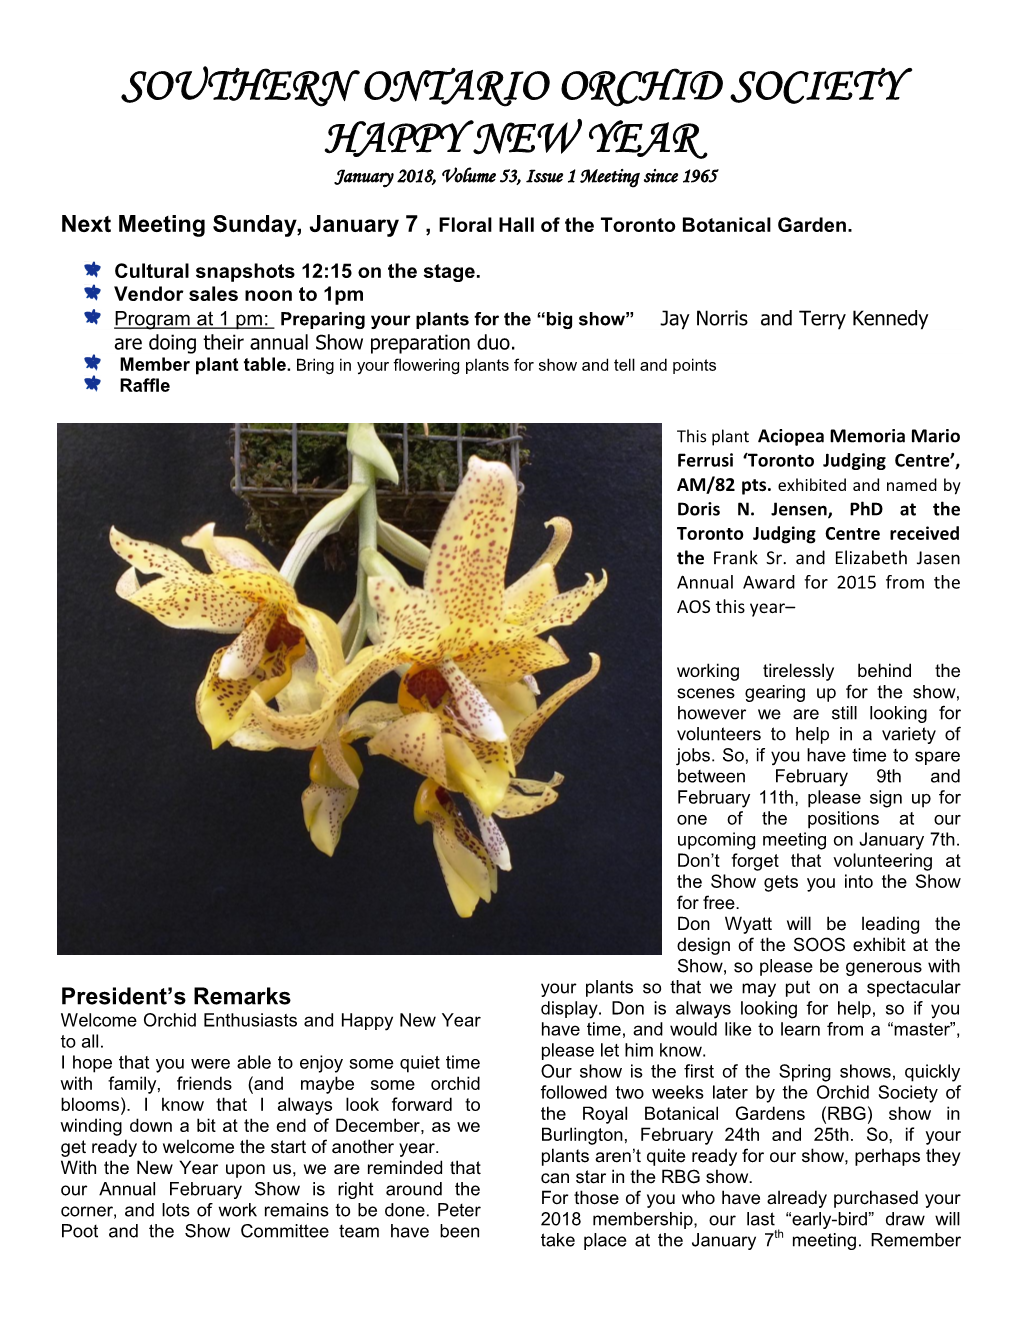 SOUTHERN ONTARIO ORCHID SOCIETY HAPPY NEW YEAR January 2018, Volume 53, Issue 1 Meeting Since 1965